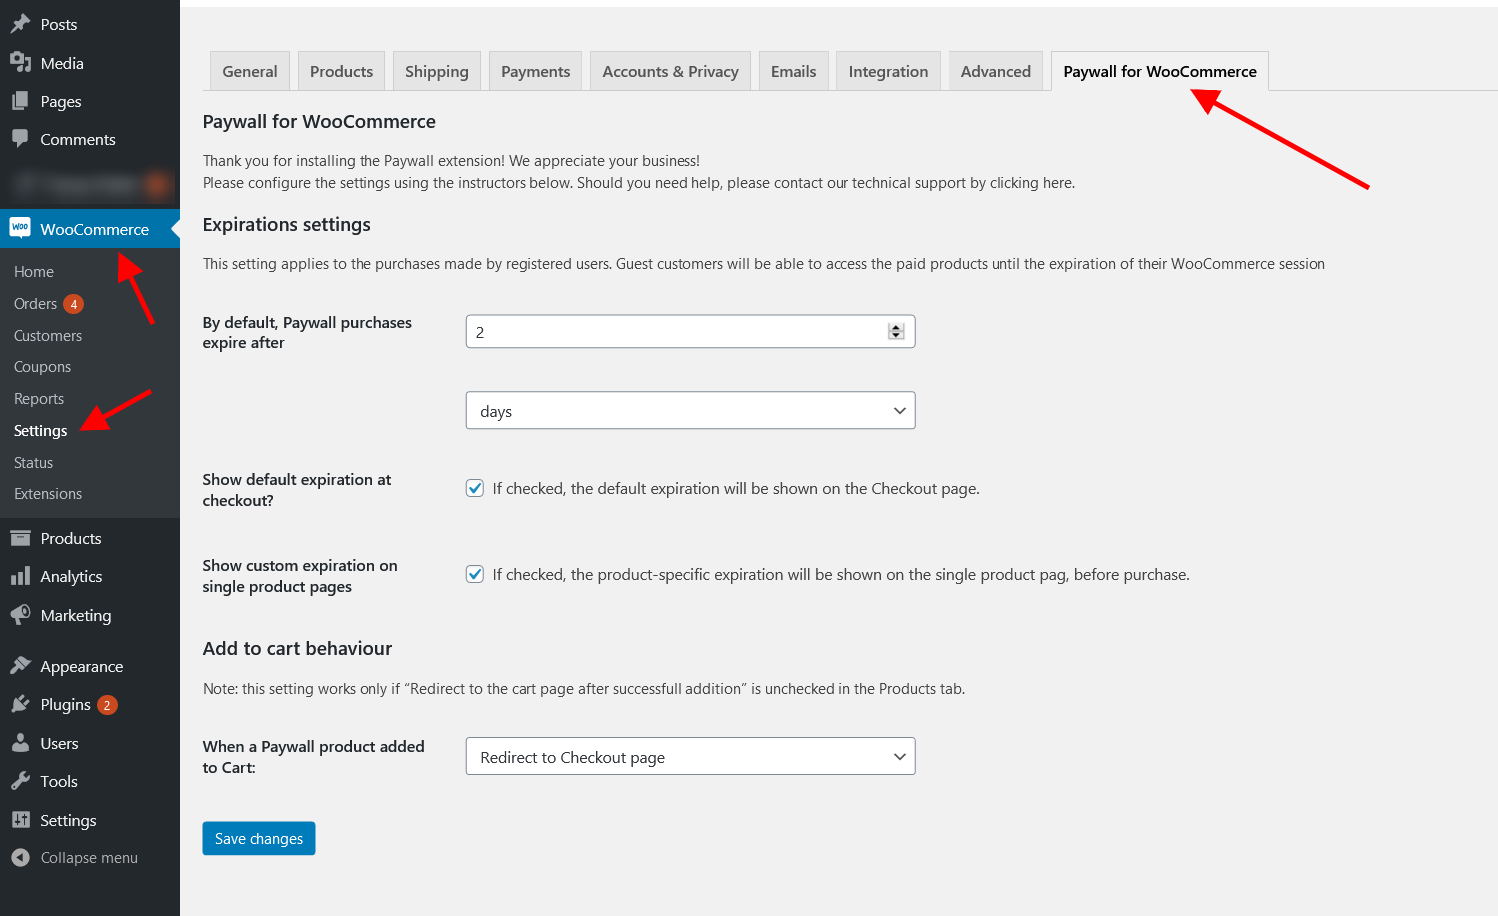 Paywall for WooCommerce Settings